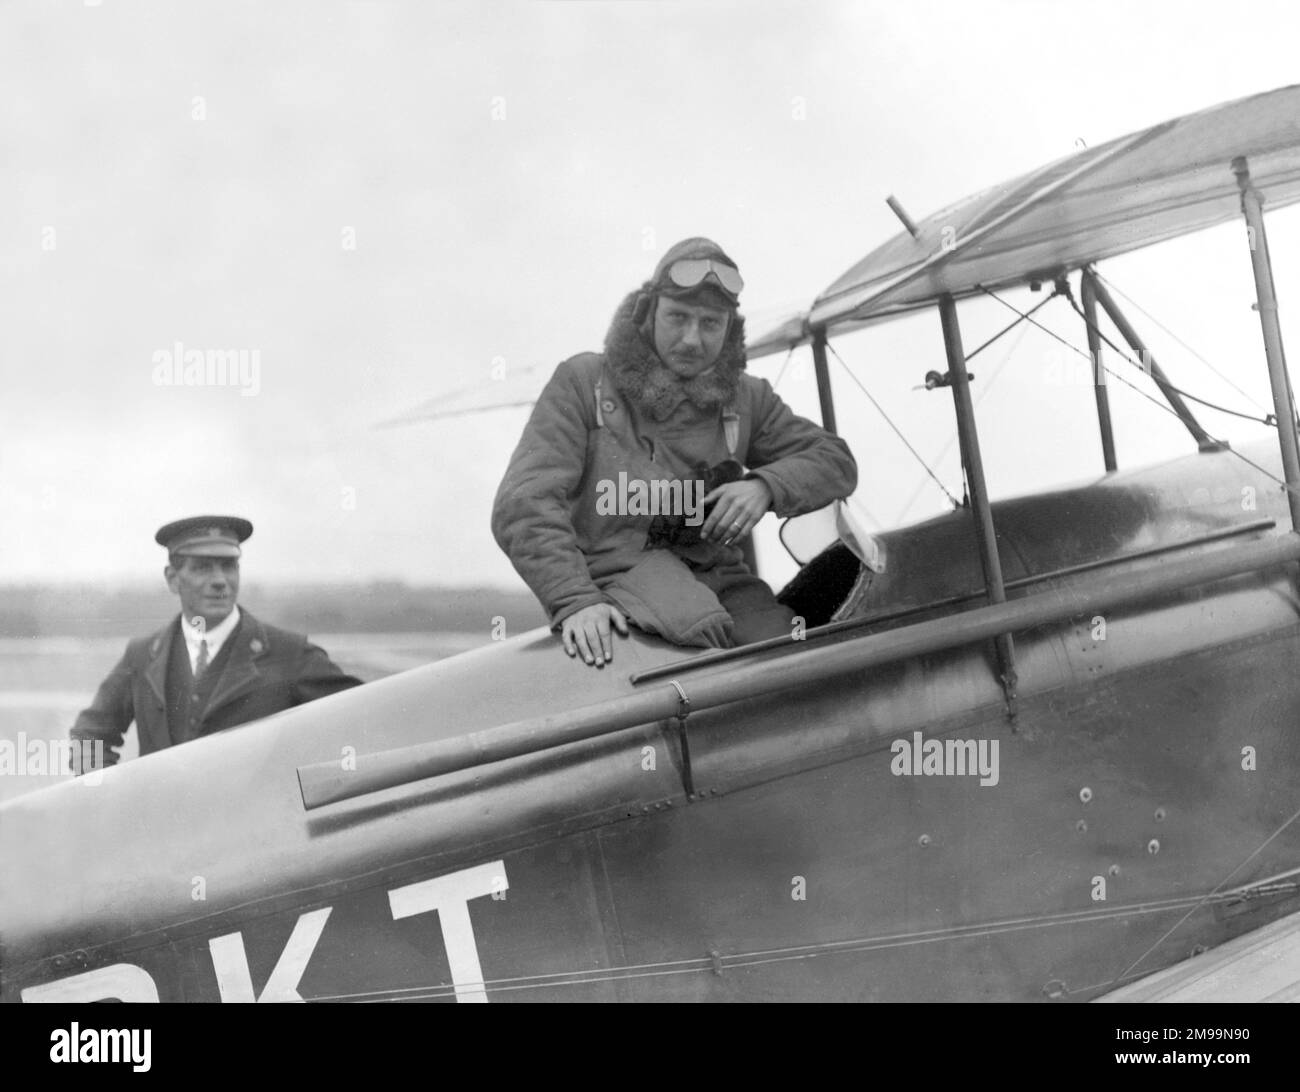 Sir Alan John Cobham (1894–1973) - English aviation pioneer standing in front of  his de Havilland DH.60 Moth G-EBKT, a light-weight, two-place, single-engine, single-bay British two-seat touring and training biplane aircraft. A prototype which Cobham flew from Croydon to Zurich and back in 14 hours, 49 minutes on 29th May 1925 (after which this photograph was likely taken). Cobham also flew the Moth in The Kings Cup Air Race, though weather forced him to land short of the finish. It placed second in a follow-up race. The aircraft ended its days in a crash at Stanmore on 21 August 1927. Stock Photo